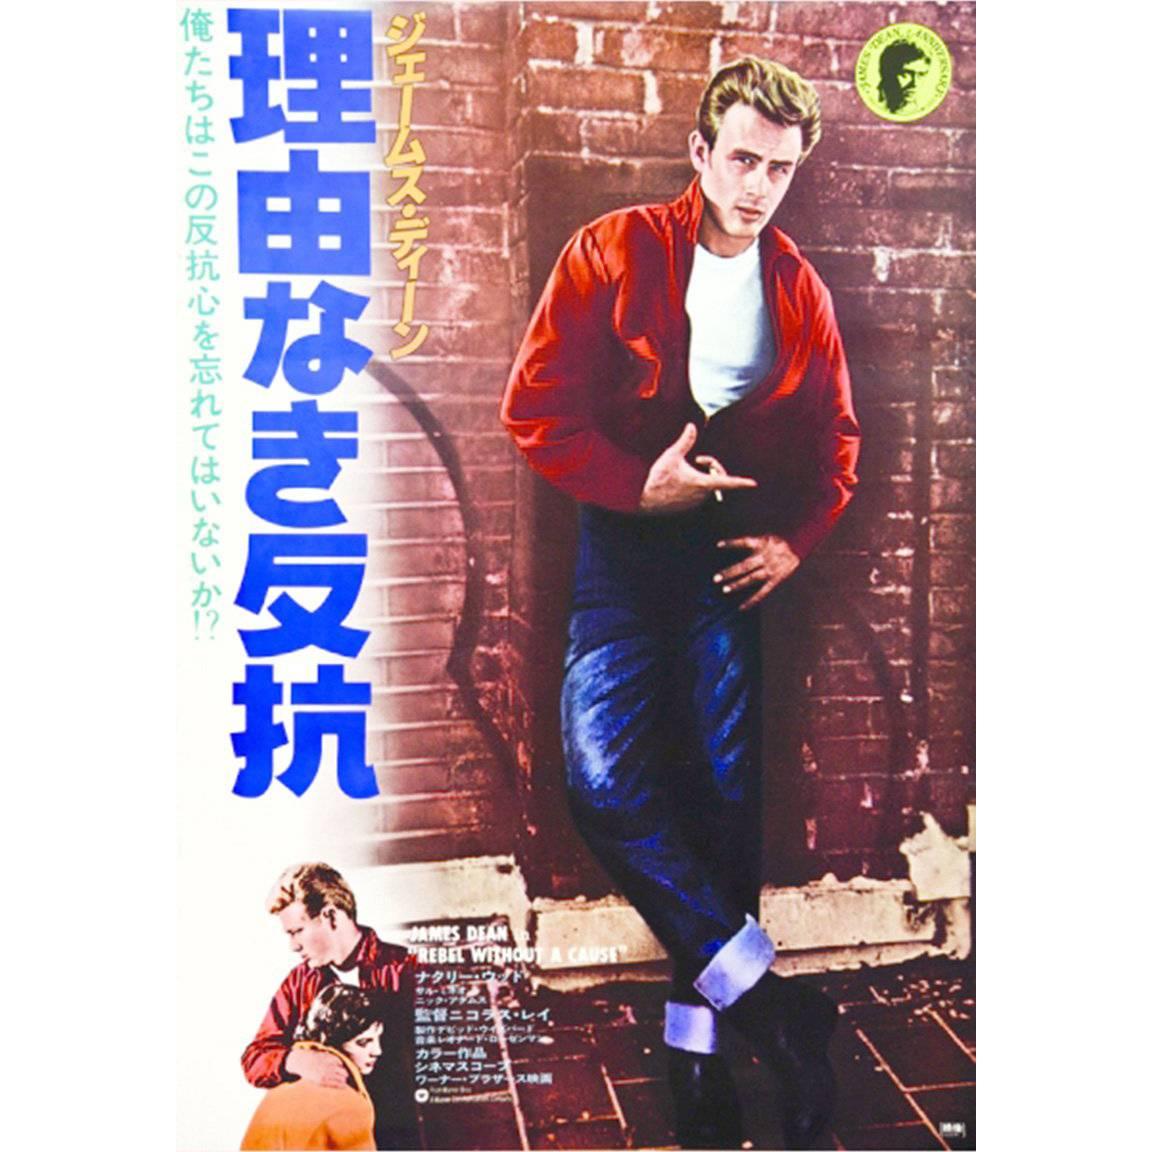 "Rebel Without a Cause", Film Poster, 1974R For Sale